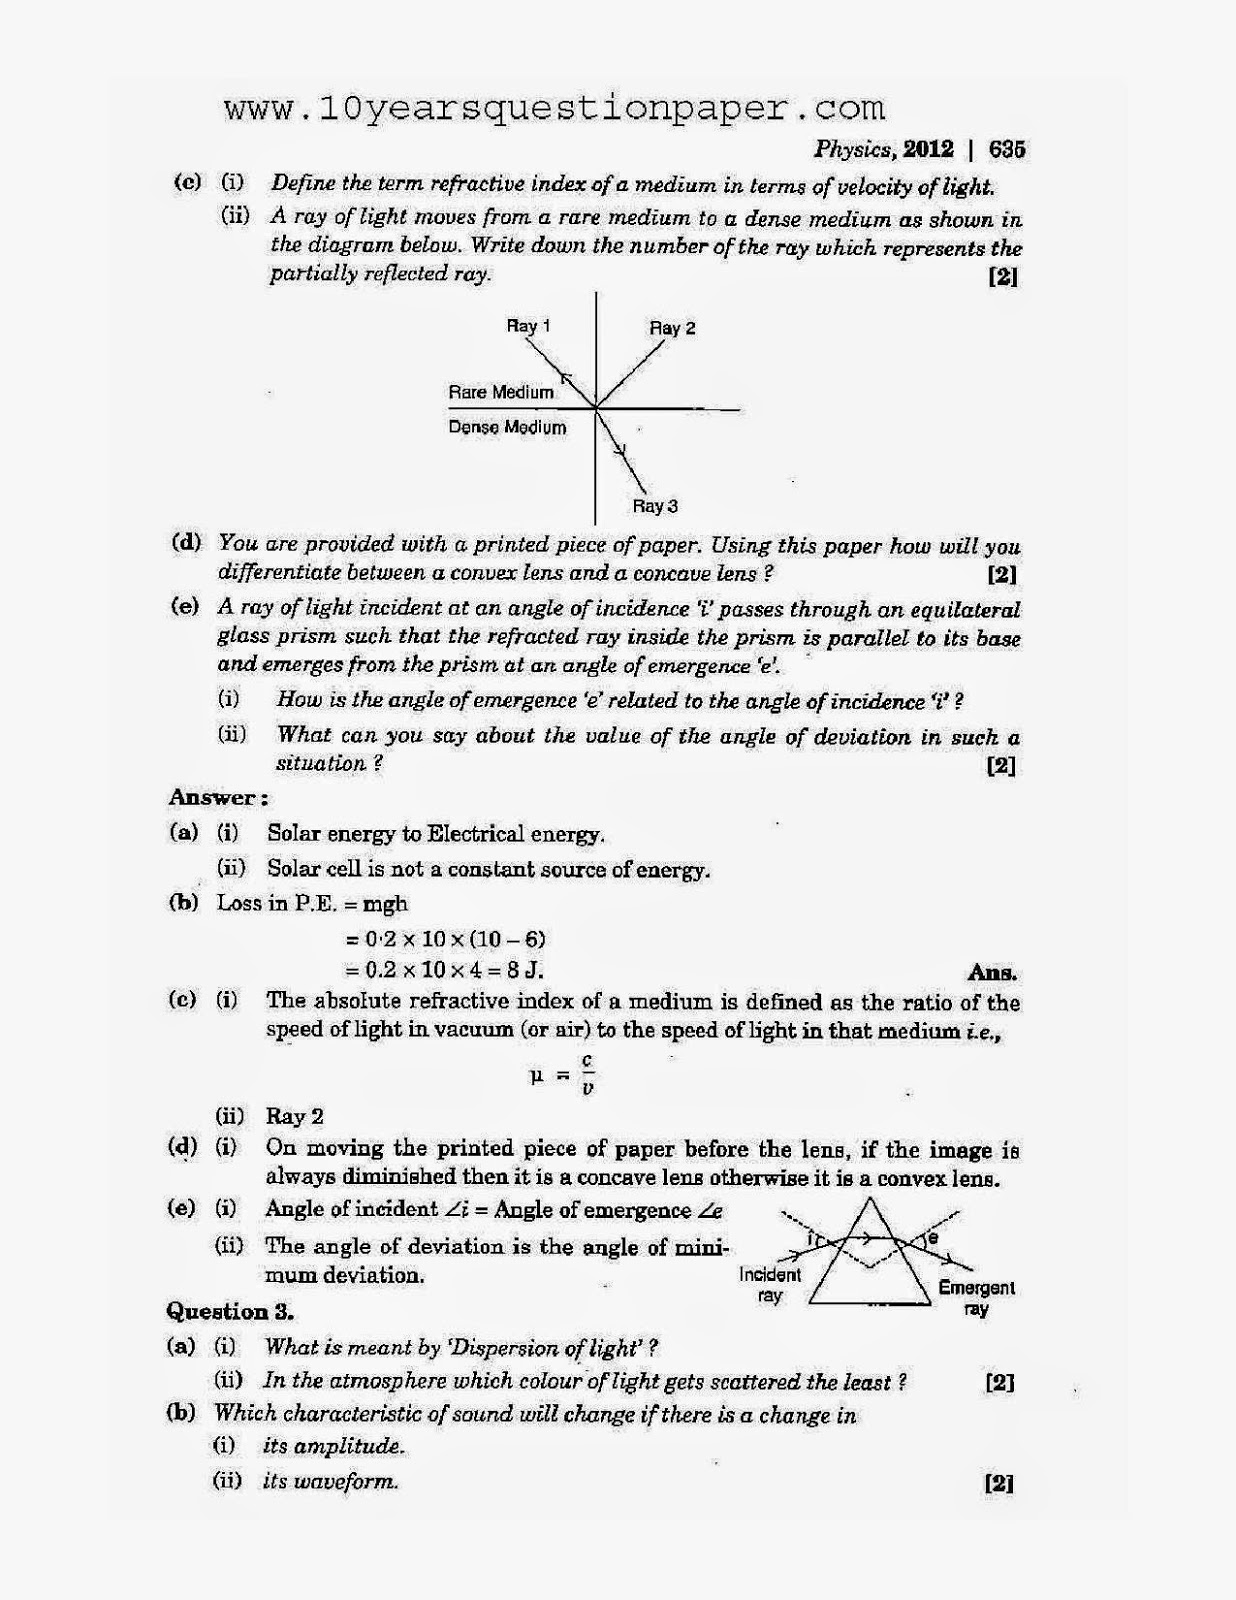 Past papers/Sample questions